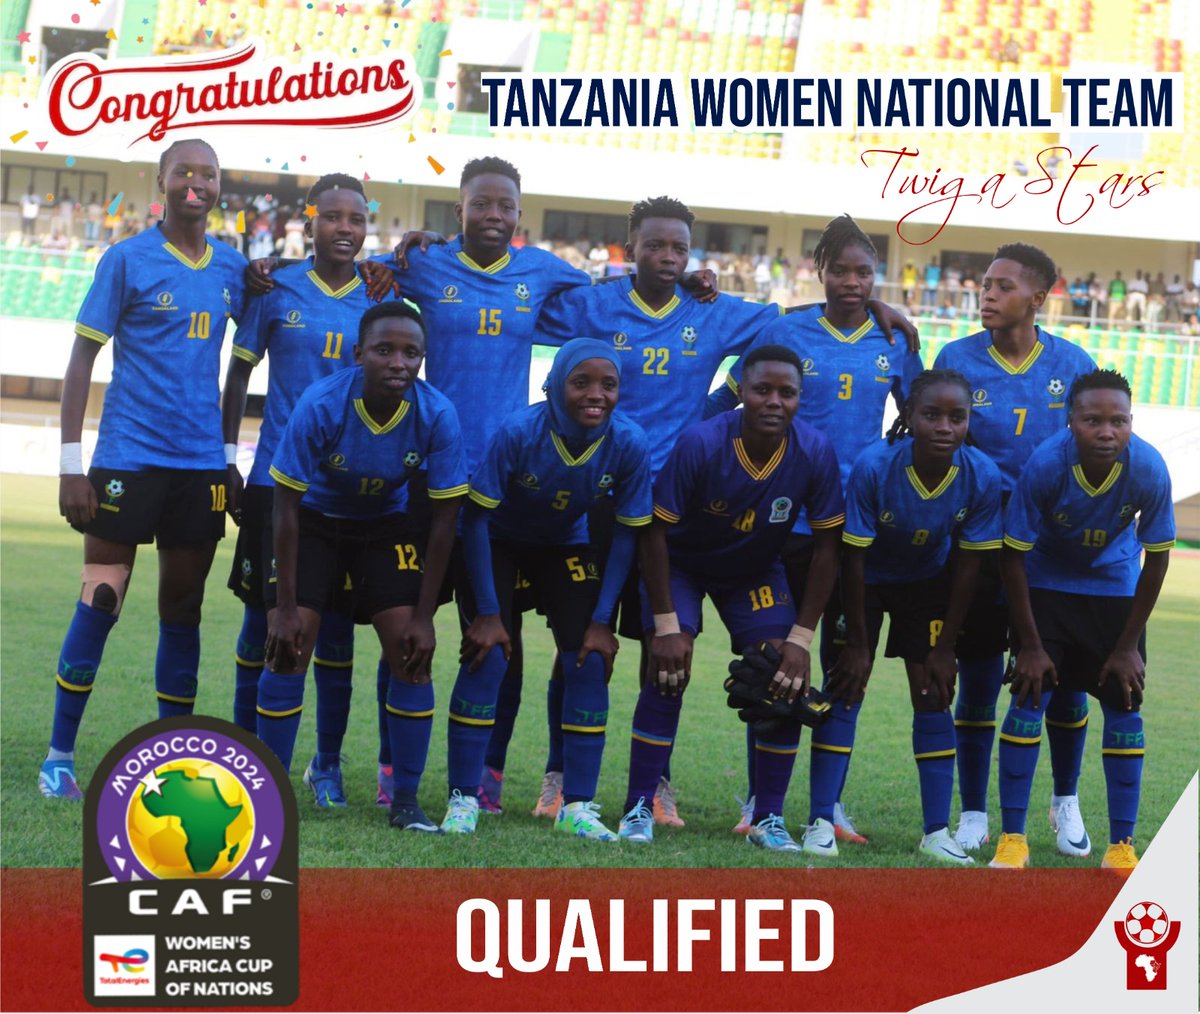 Congratulations Tanzania Women National Team 'Twiga Stars 🌟 ' on qualifying for the 2024 Women’s African Cup of Nations 🏆to be held in Morocco.

#wafconqualifiers #WAFCON #twigastars #tanzania